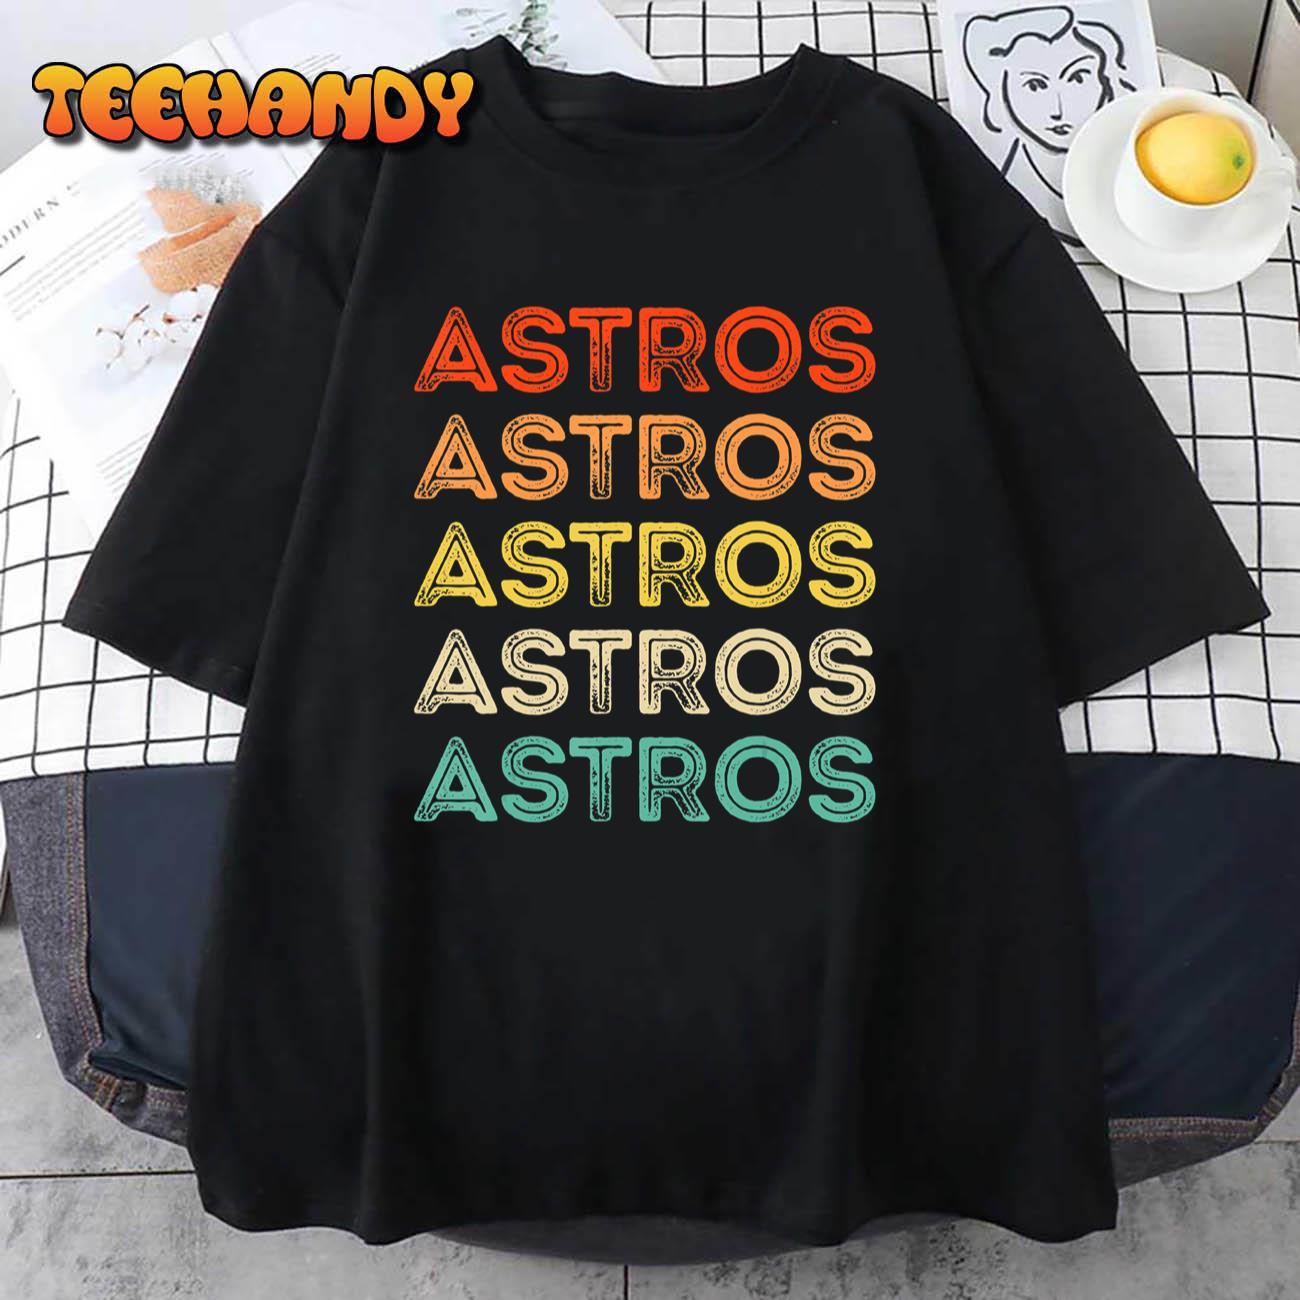 Astros vintage 3T T-shirt and overalls. NWT! Adorable! Genuine merchandise!  for Sale in Friendswood, TX - OfferUp